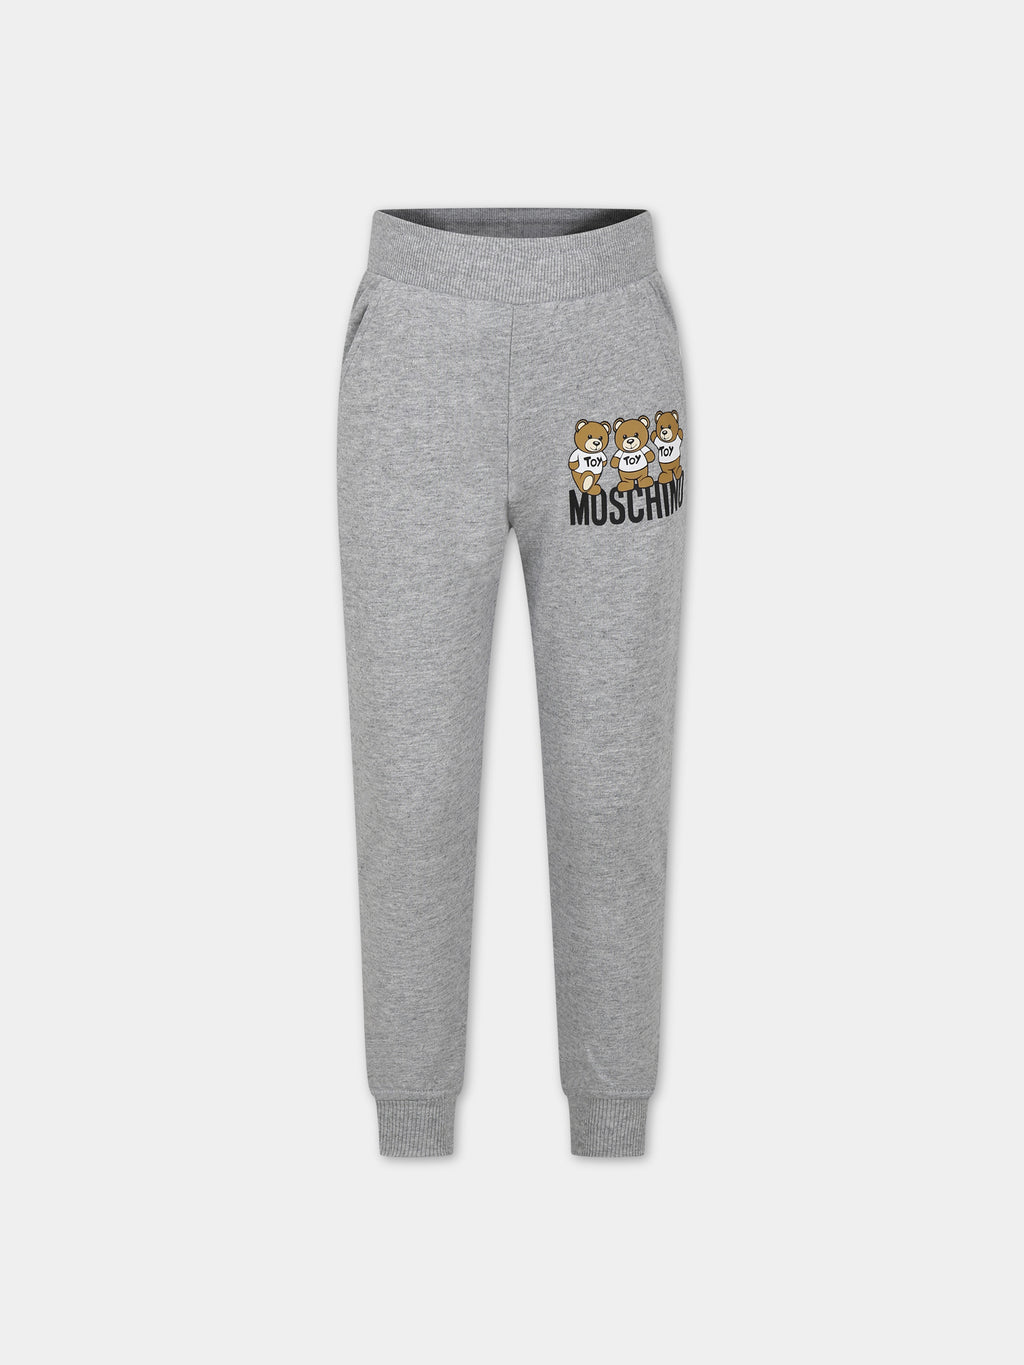 Gray trousers for kids with three Teddy Bears and logo